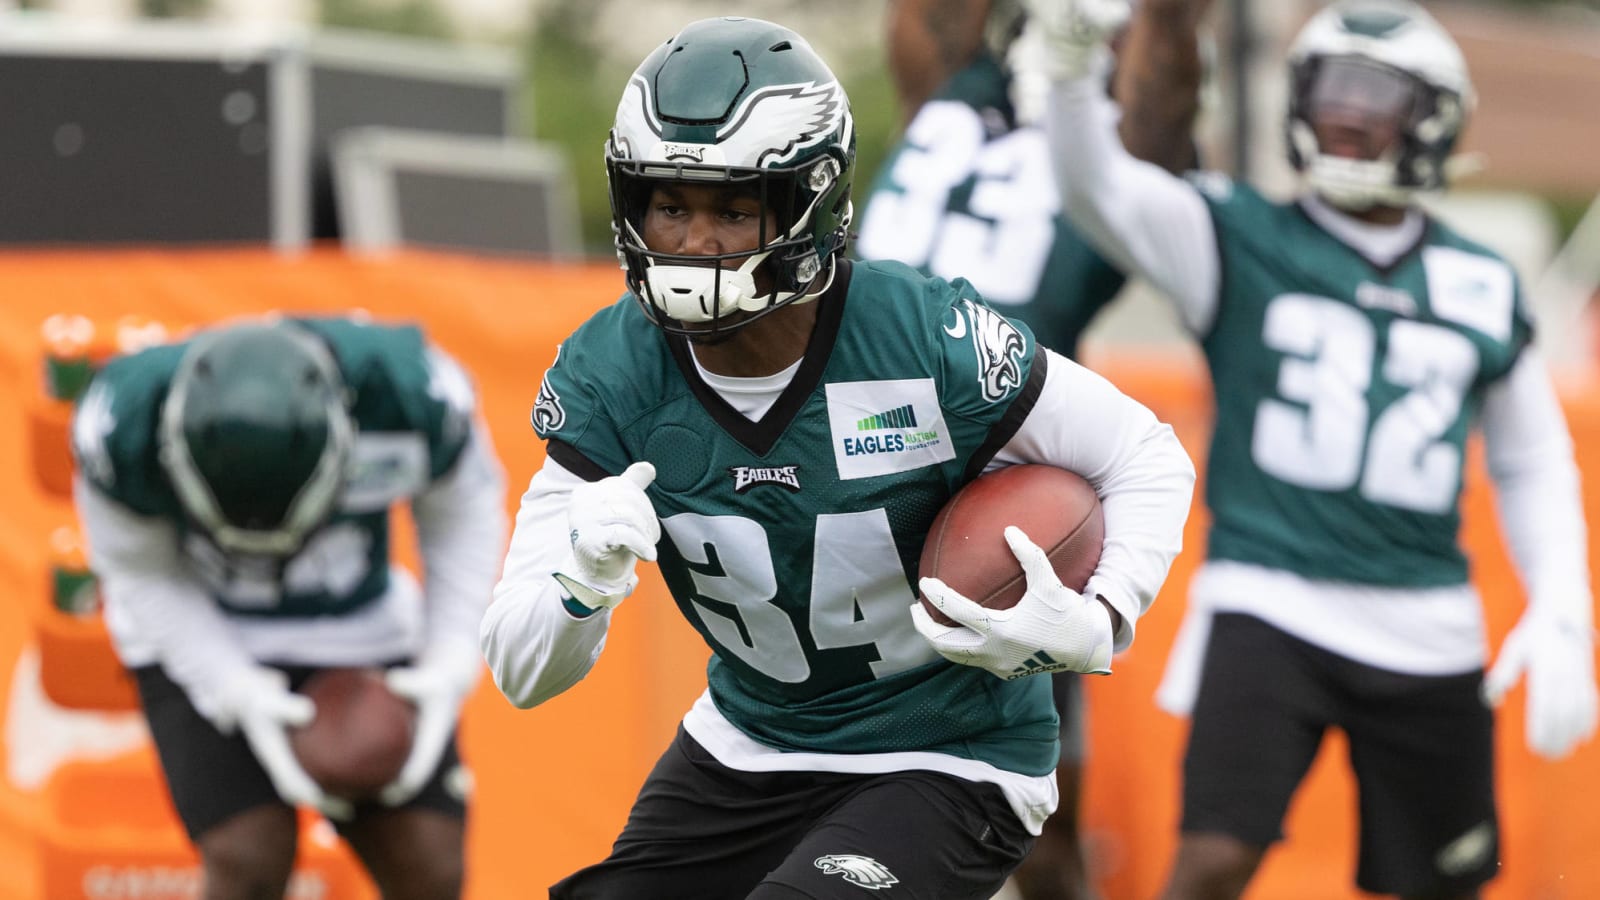 Eagles waive RB Kerryon Johnson after knee injury